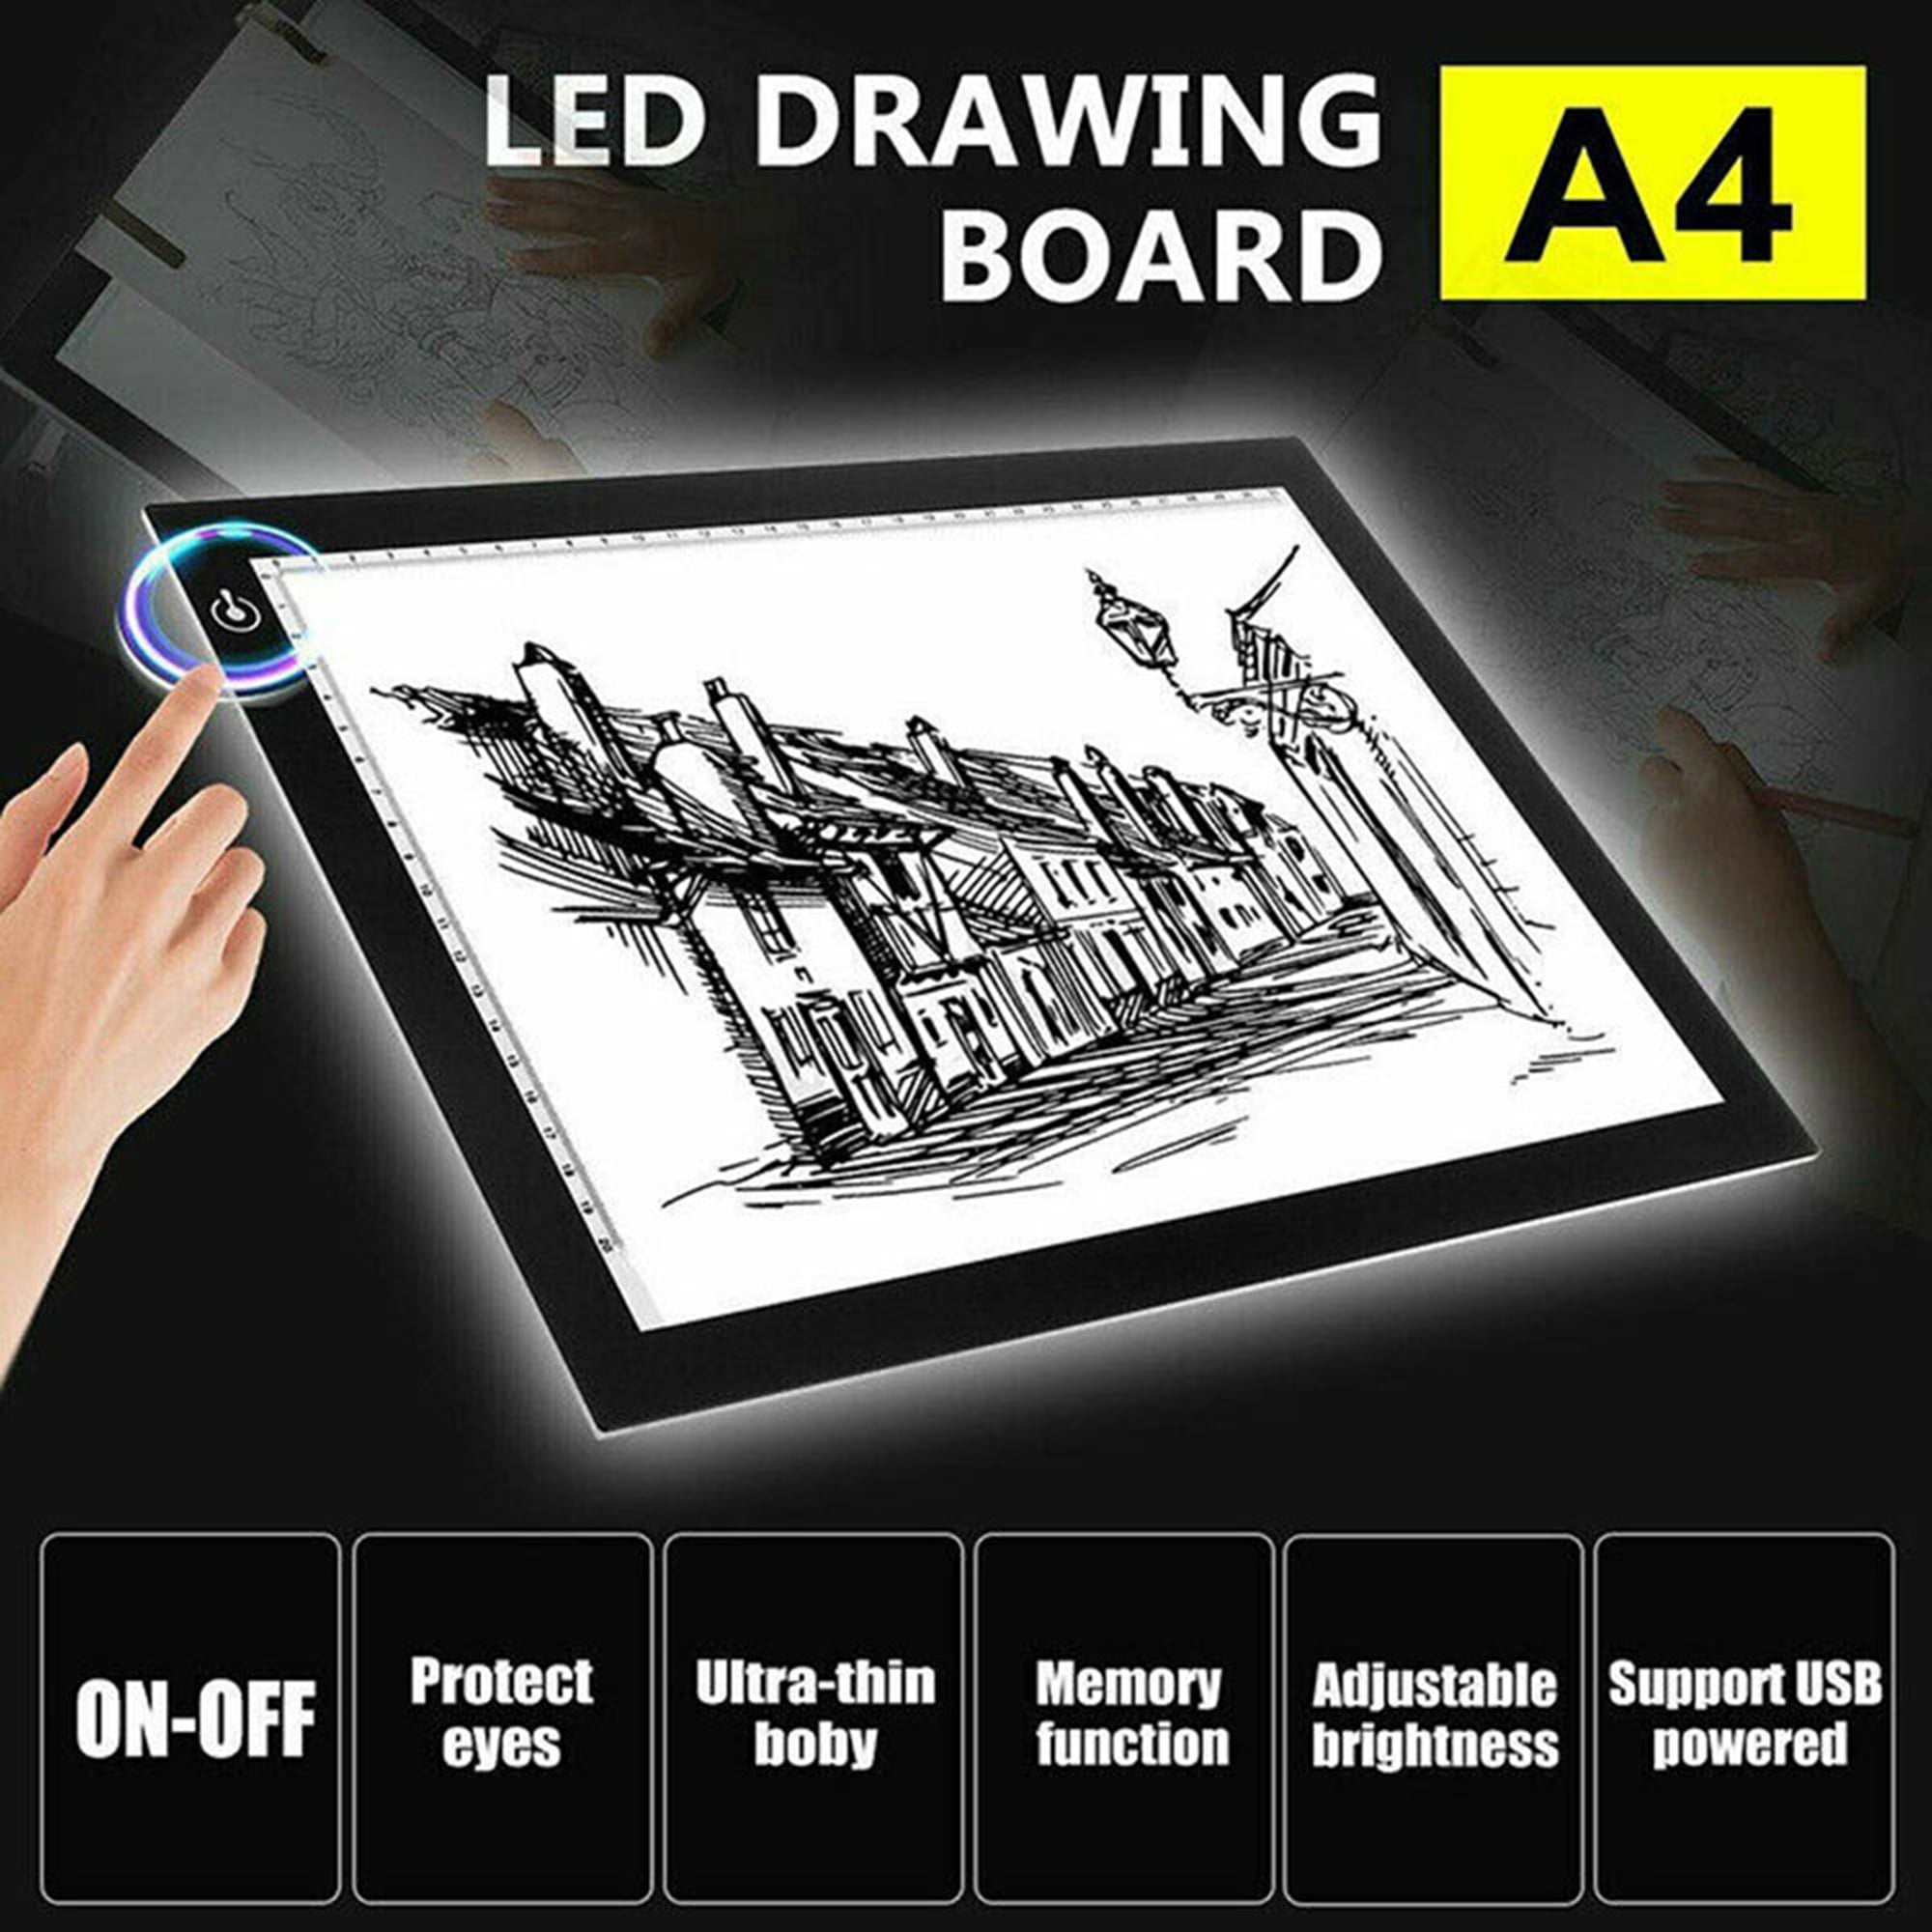  LED Tracing Light Box, MAGT Led Tracing Light Box Board A5 Art  Drawing Copy Pad Table USB Cable for Animation Cartoon Tattoo Tracing Craft  Projects